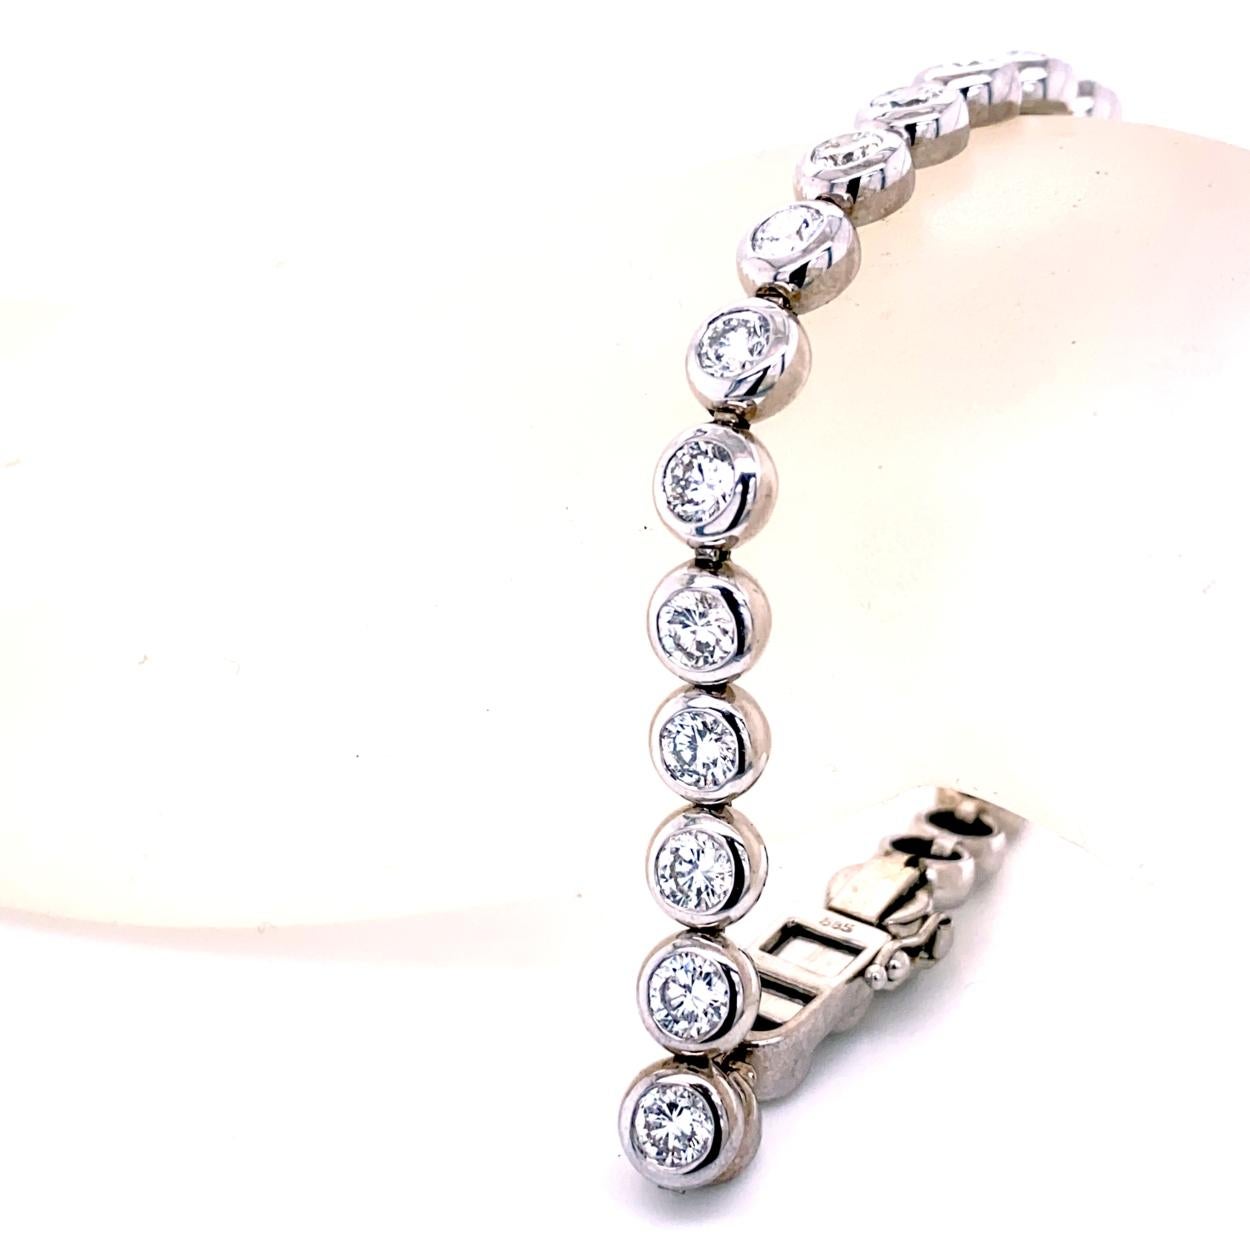 This Diamond Tennis Bracelet consists of 29 Links of Bezel Set 4mm (1/4 Ct) Round Brilliant diamonds set in 14K White Gold.   The bracelet comes with a  safety clasp to protect it from loss. 
Total Weight of diamonds: 7.25 Ct 
Total Weight of